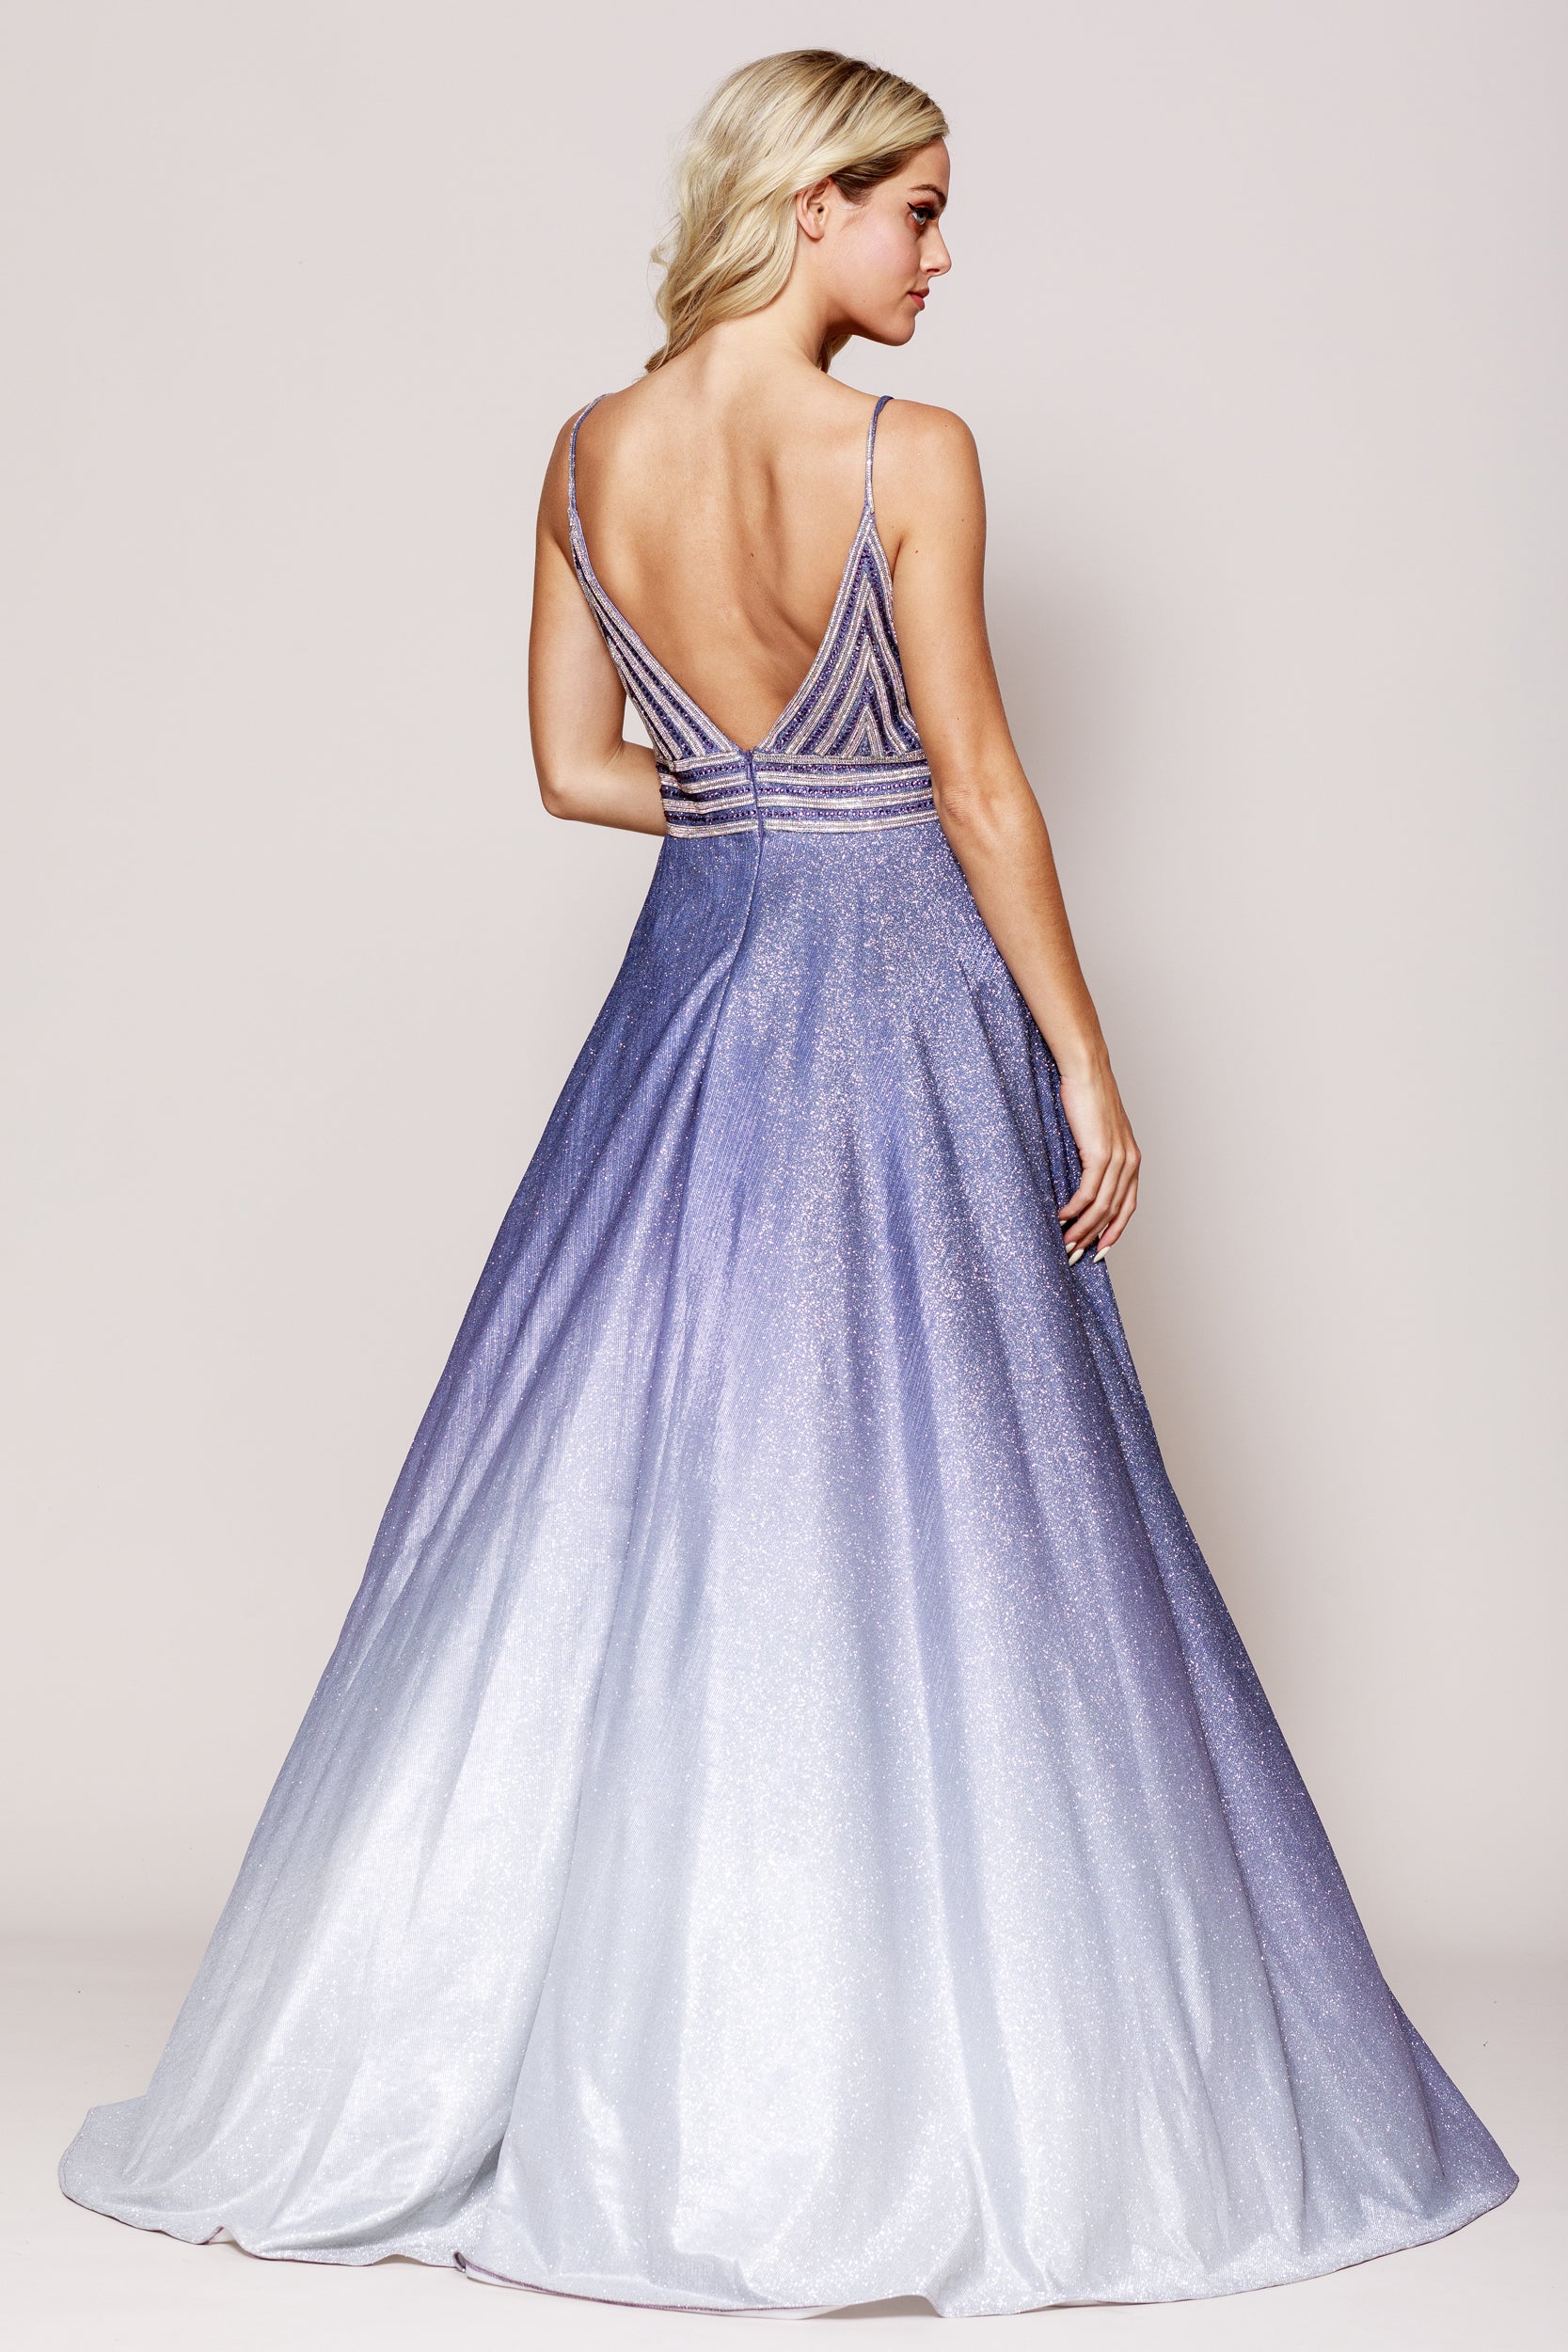 Image of Empire Prom Gown With Spaghetti Straps back in Lavender